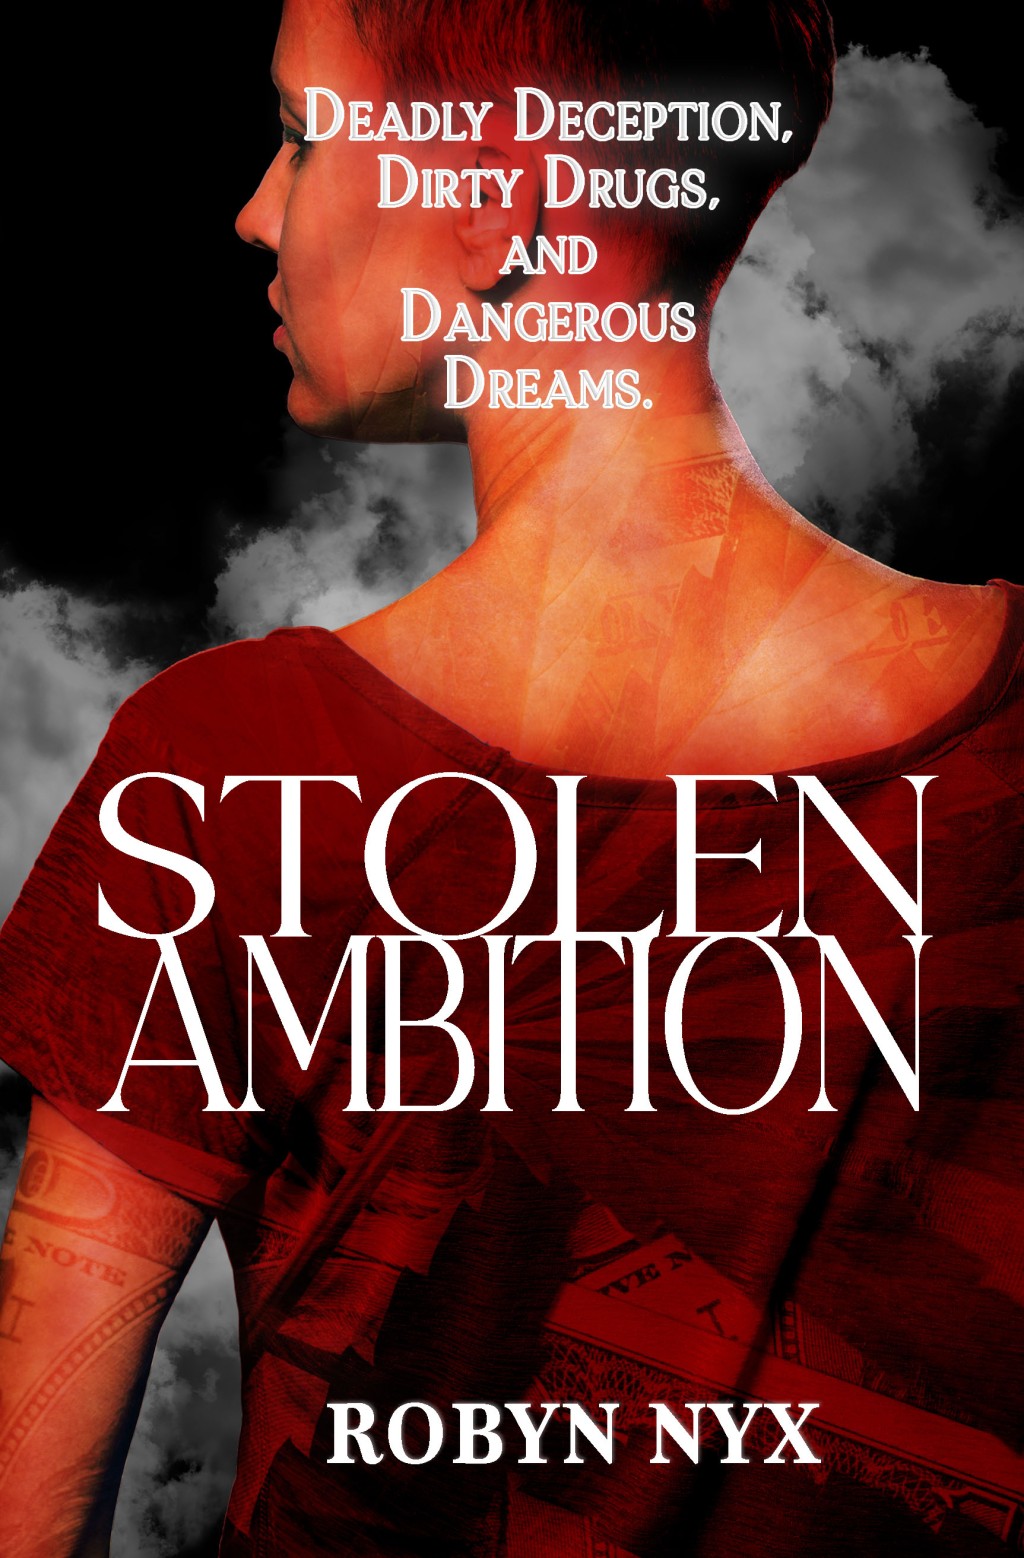 5* Review: Stolen Ambition – Robyn Nyx